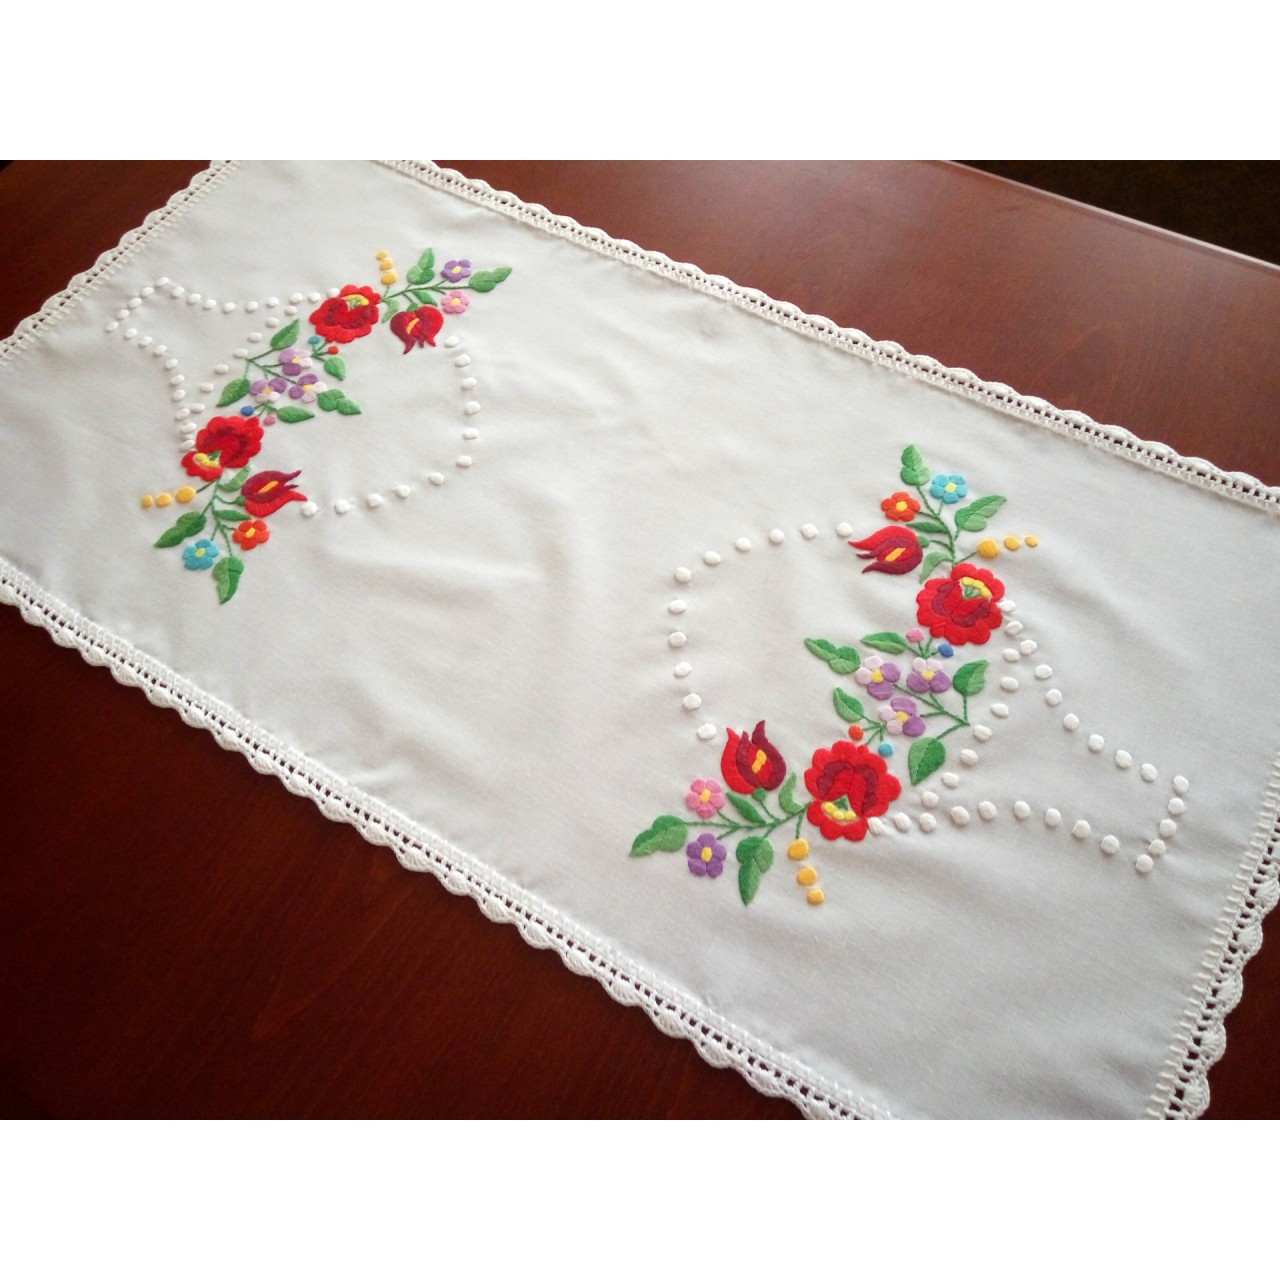 Tablecloth Hand Embroidery Patterns Embroidered Crocheted Kalocsa Tablecloth Table Kal Tr 329